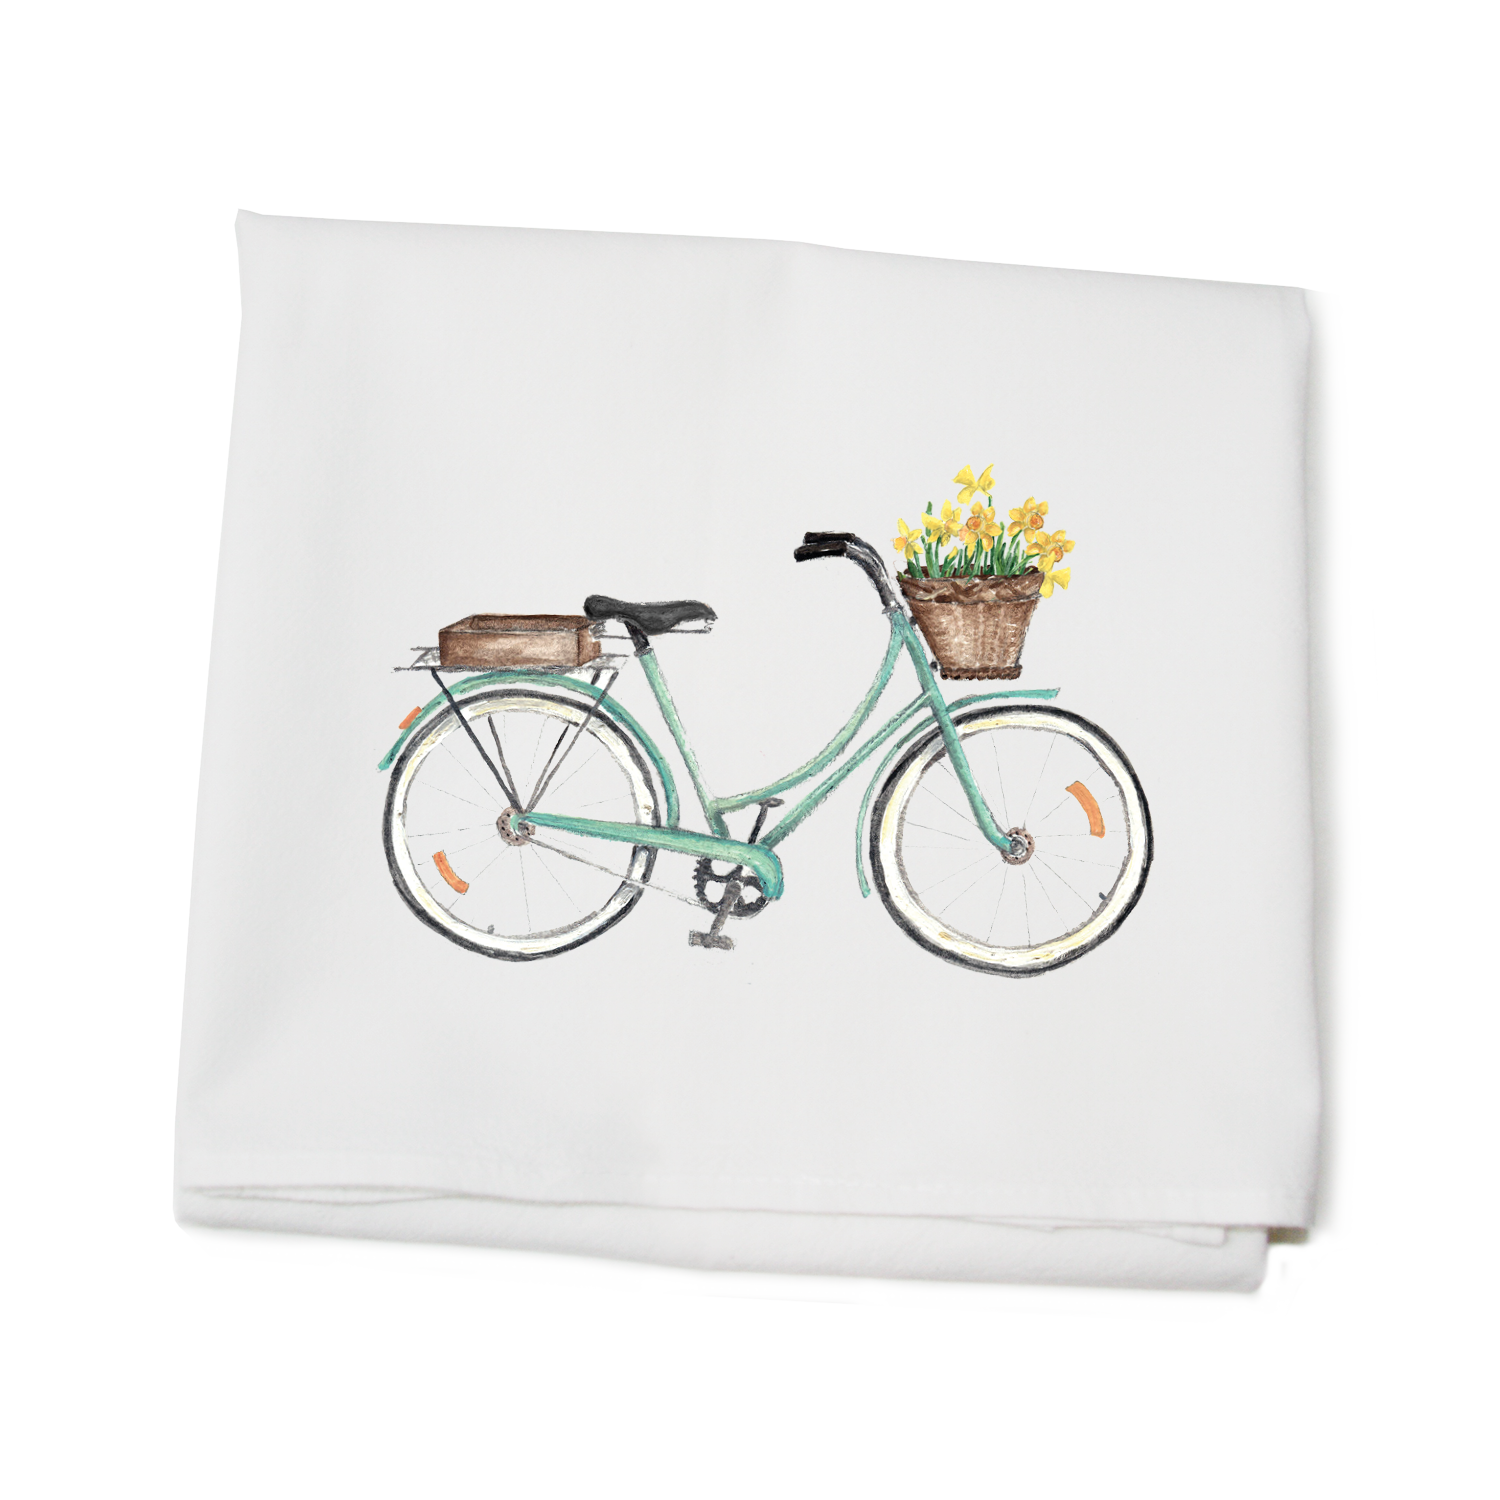 seafoam bike with daffodils in front flour sack towel